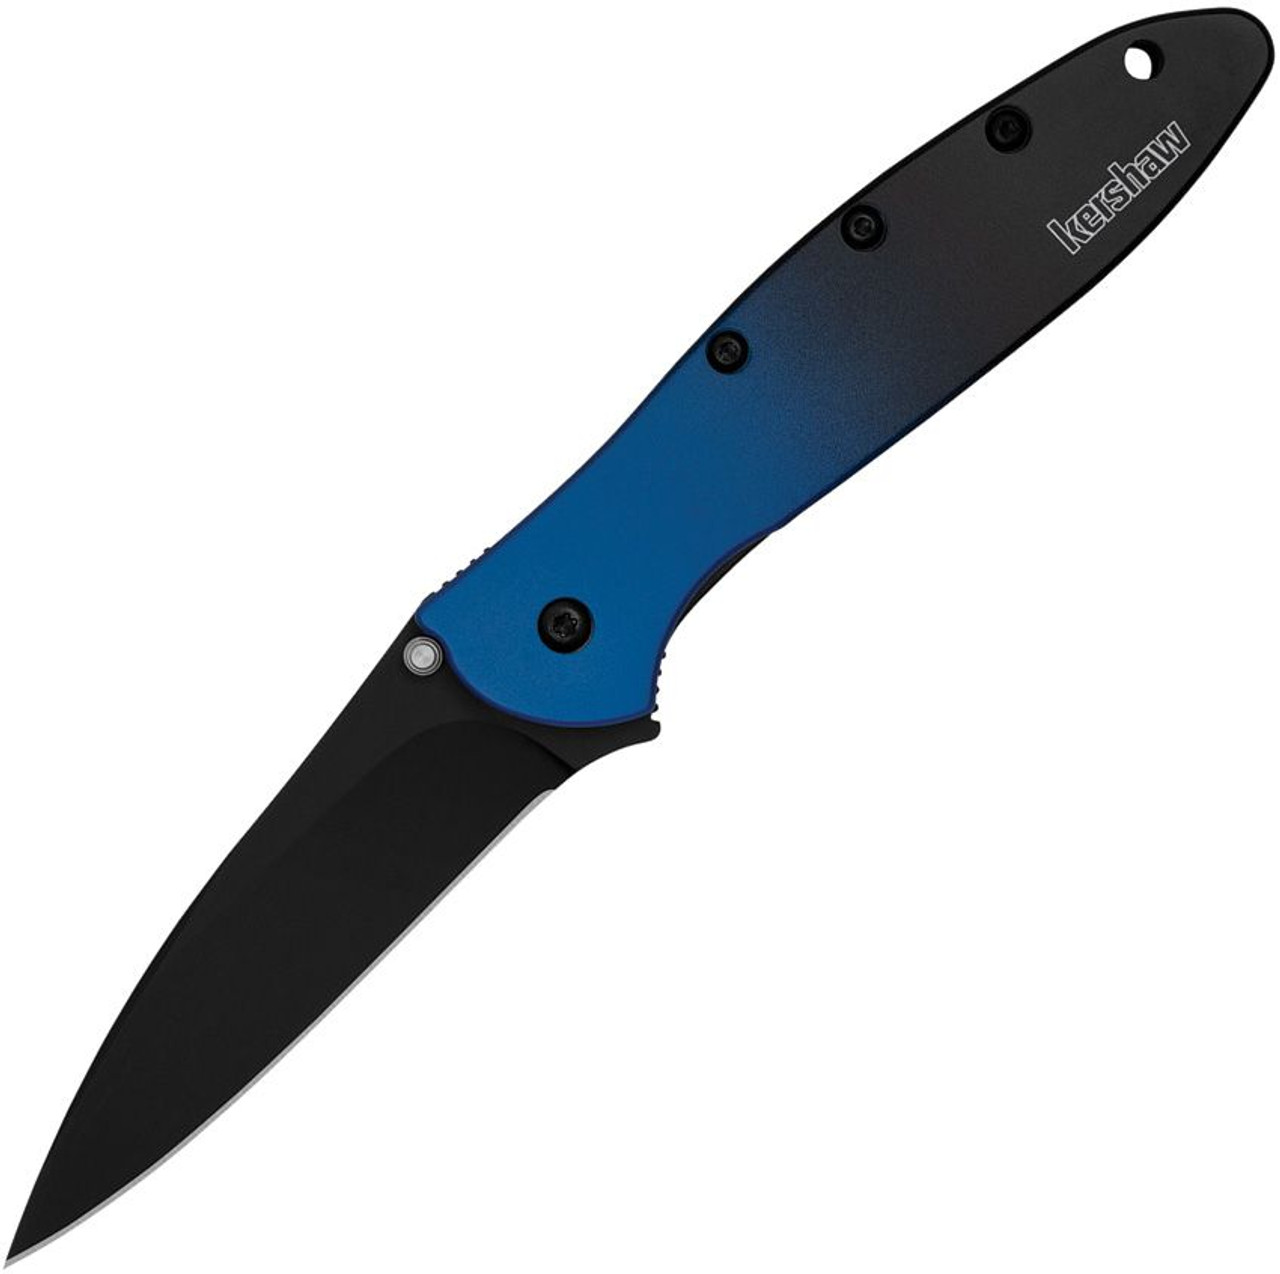 Kershaw Leek Assisted Opening Knife (1660GBLUBLK)- 3.00" Black Magnacut Drop Point Blade, Gradient Blue and Black Aluminum Handle